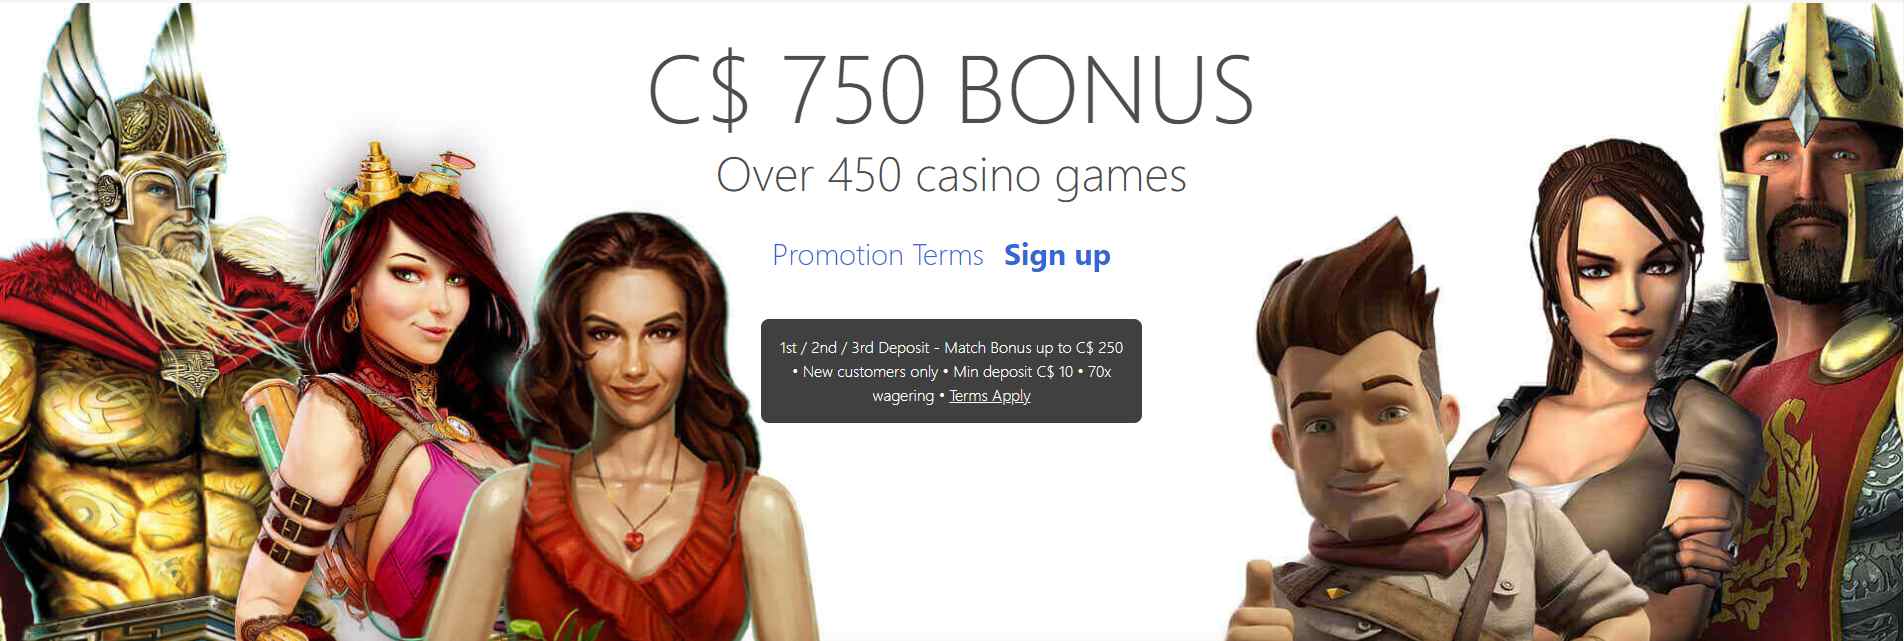 ruby Fortune Casino Promotion